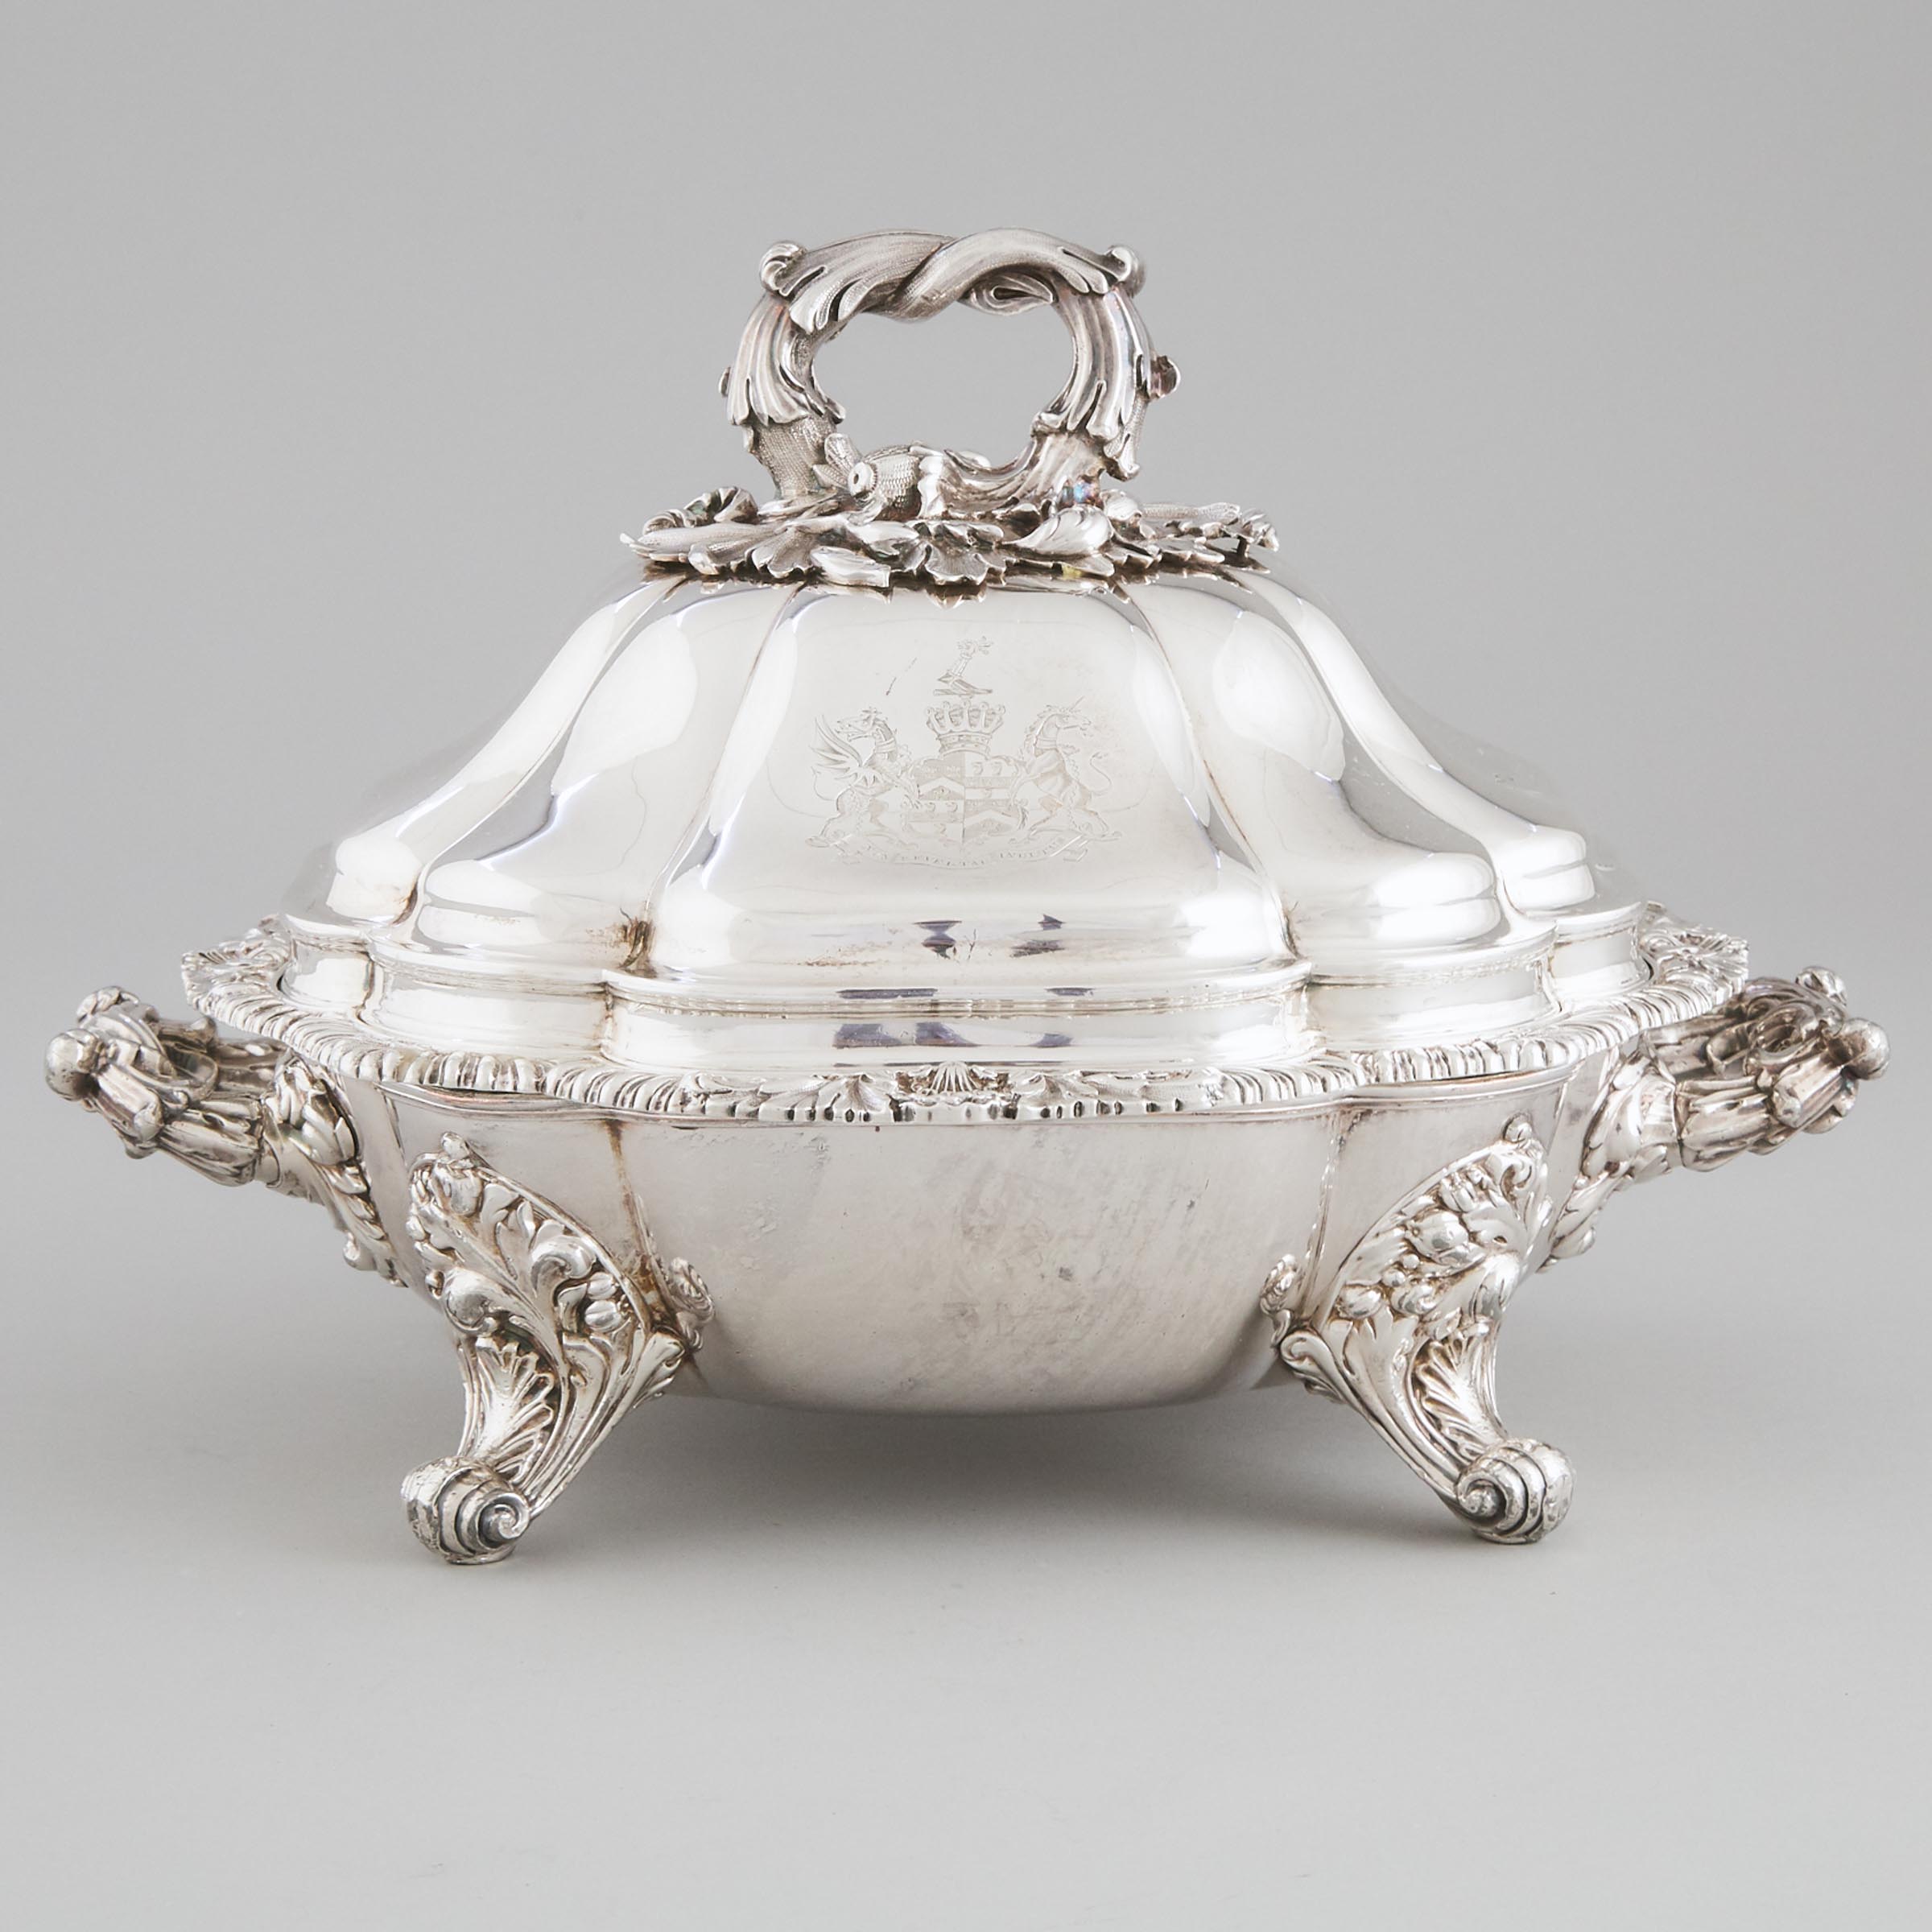 William IV Silver Covered Entrée Dish with Old Sheffield Plate Warming Stand, William Ker Reid, London, 1833